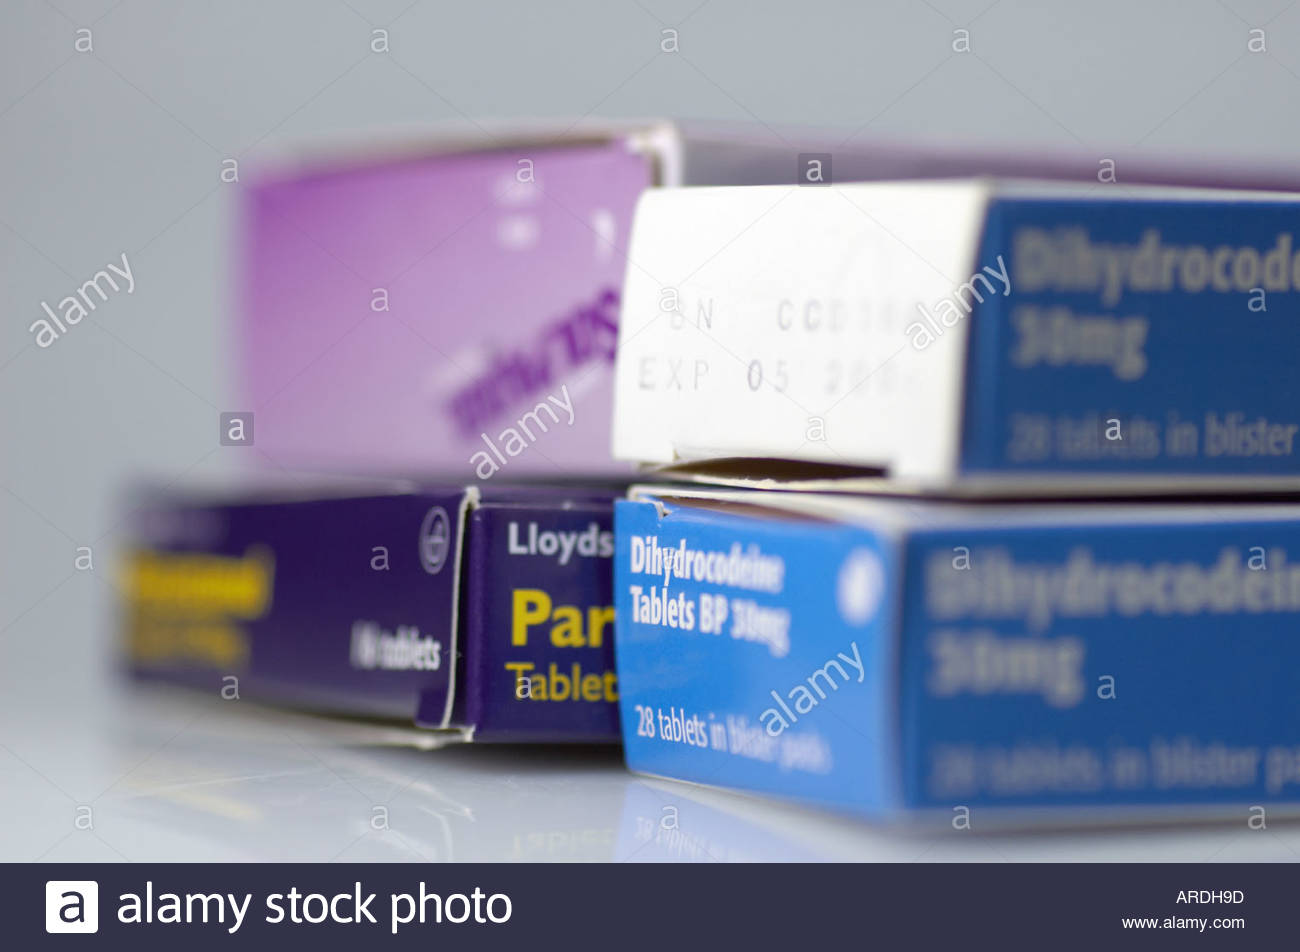 Packets of various drugs and medicines Stock Photo